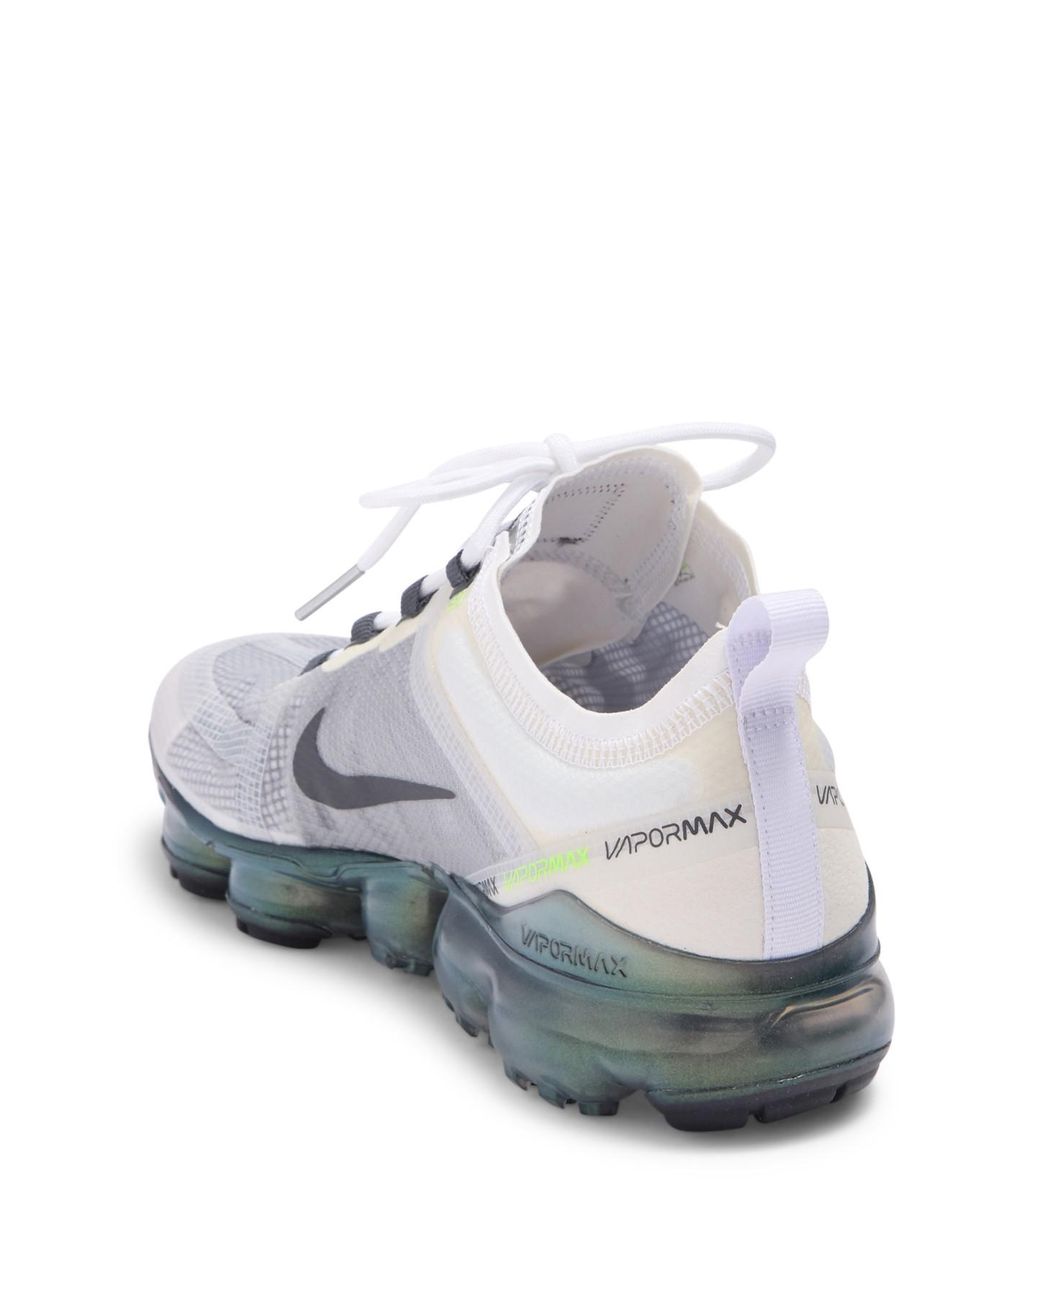 Nike Air Vapormax 2019 Prm Shoes - Size 12 in White/Grey/Platinum (White)  for Men | Lyst